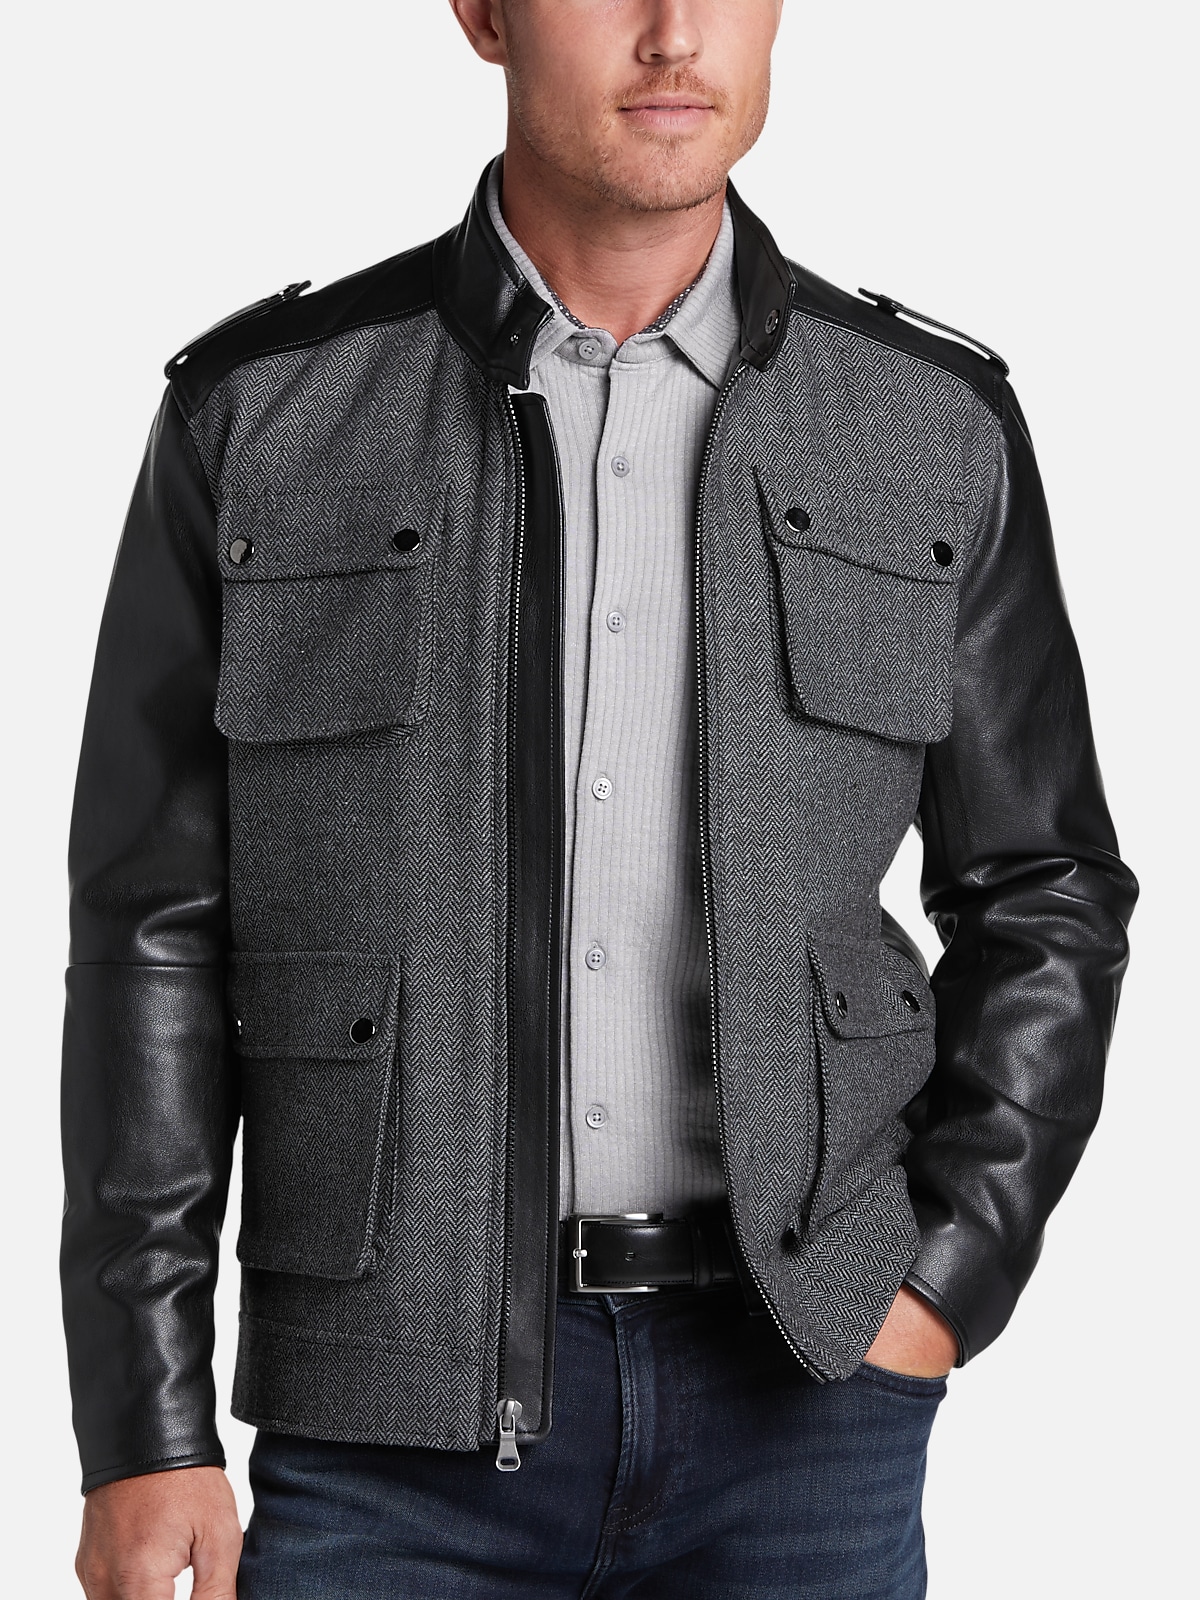 Michael Strahan Modern Fit Faux Leather Military Jacket All Clearance 3999 Mens Wearhouse 